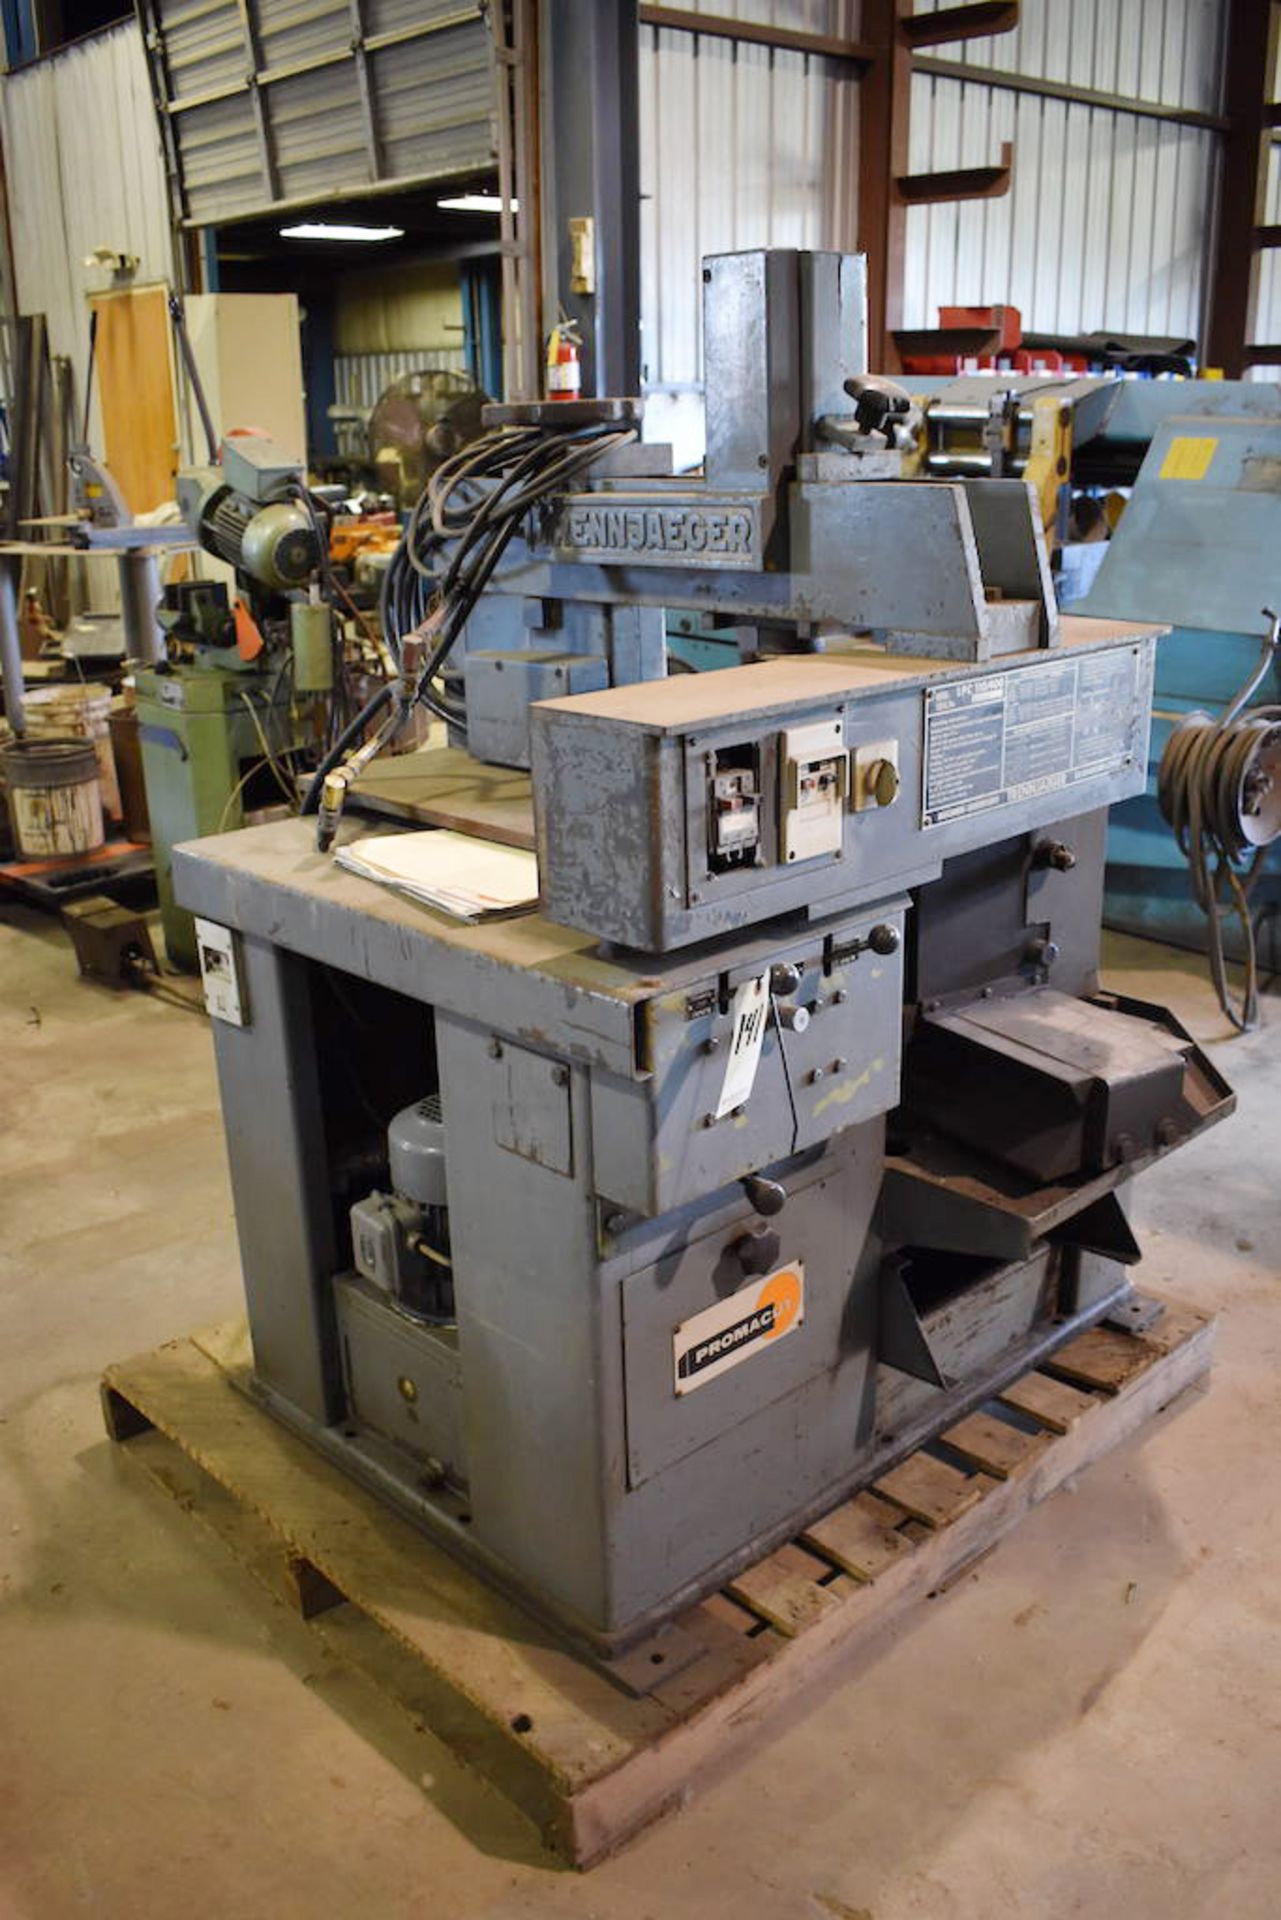 14” Tennjaeger Promecut LPC110/400 Cold Saw, Hydraulic Vise, Hydraulic Vertical Material Hold